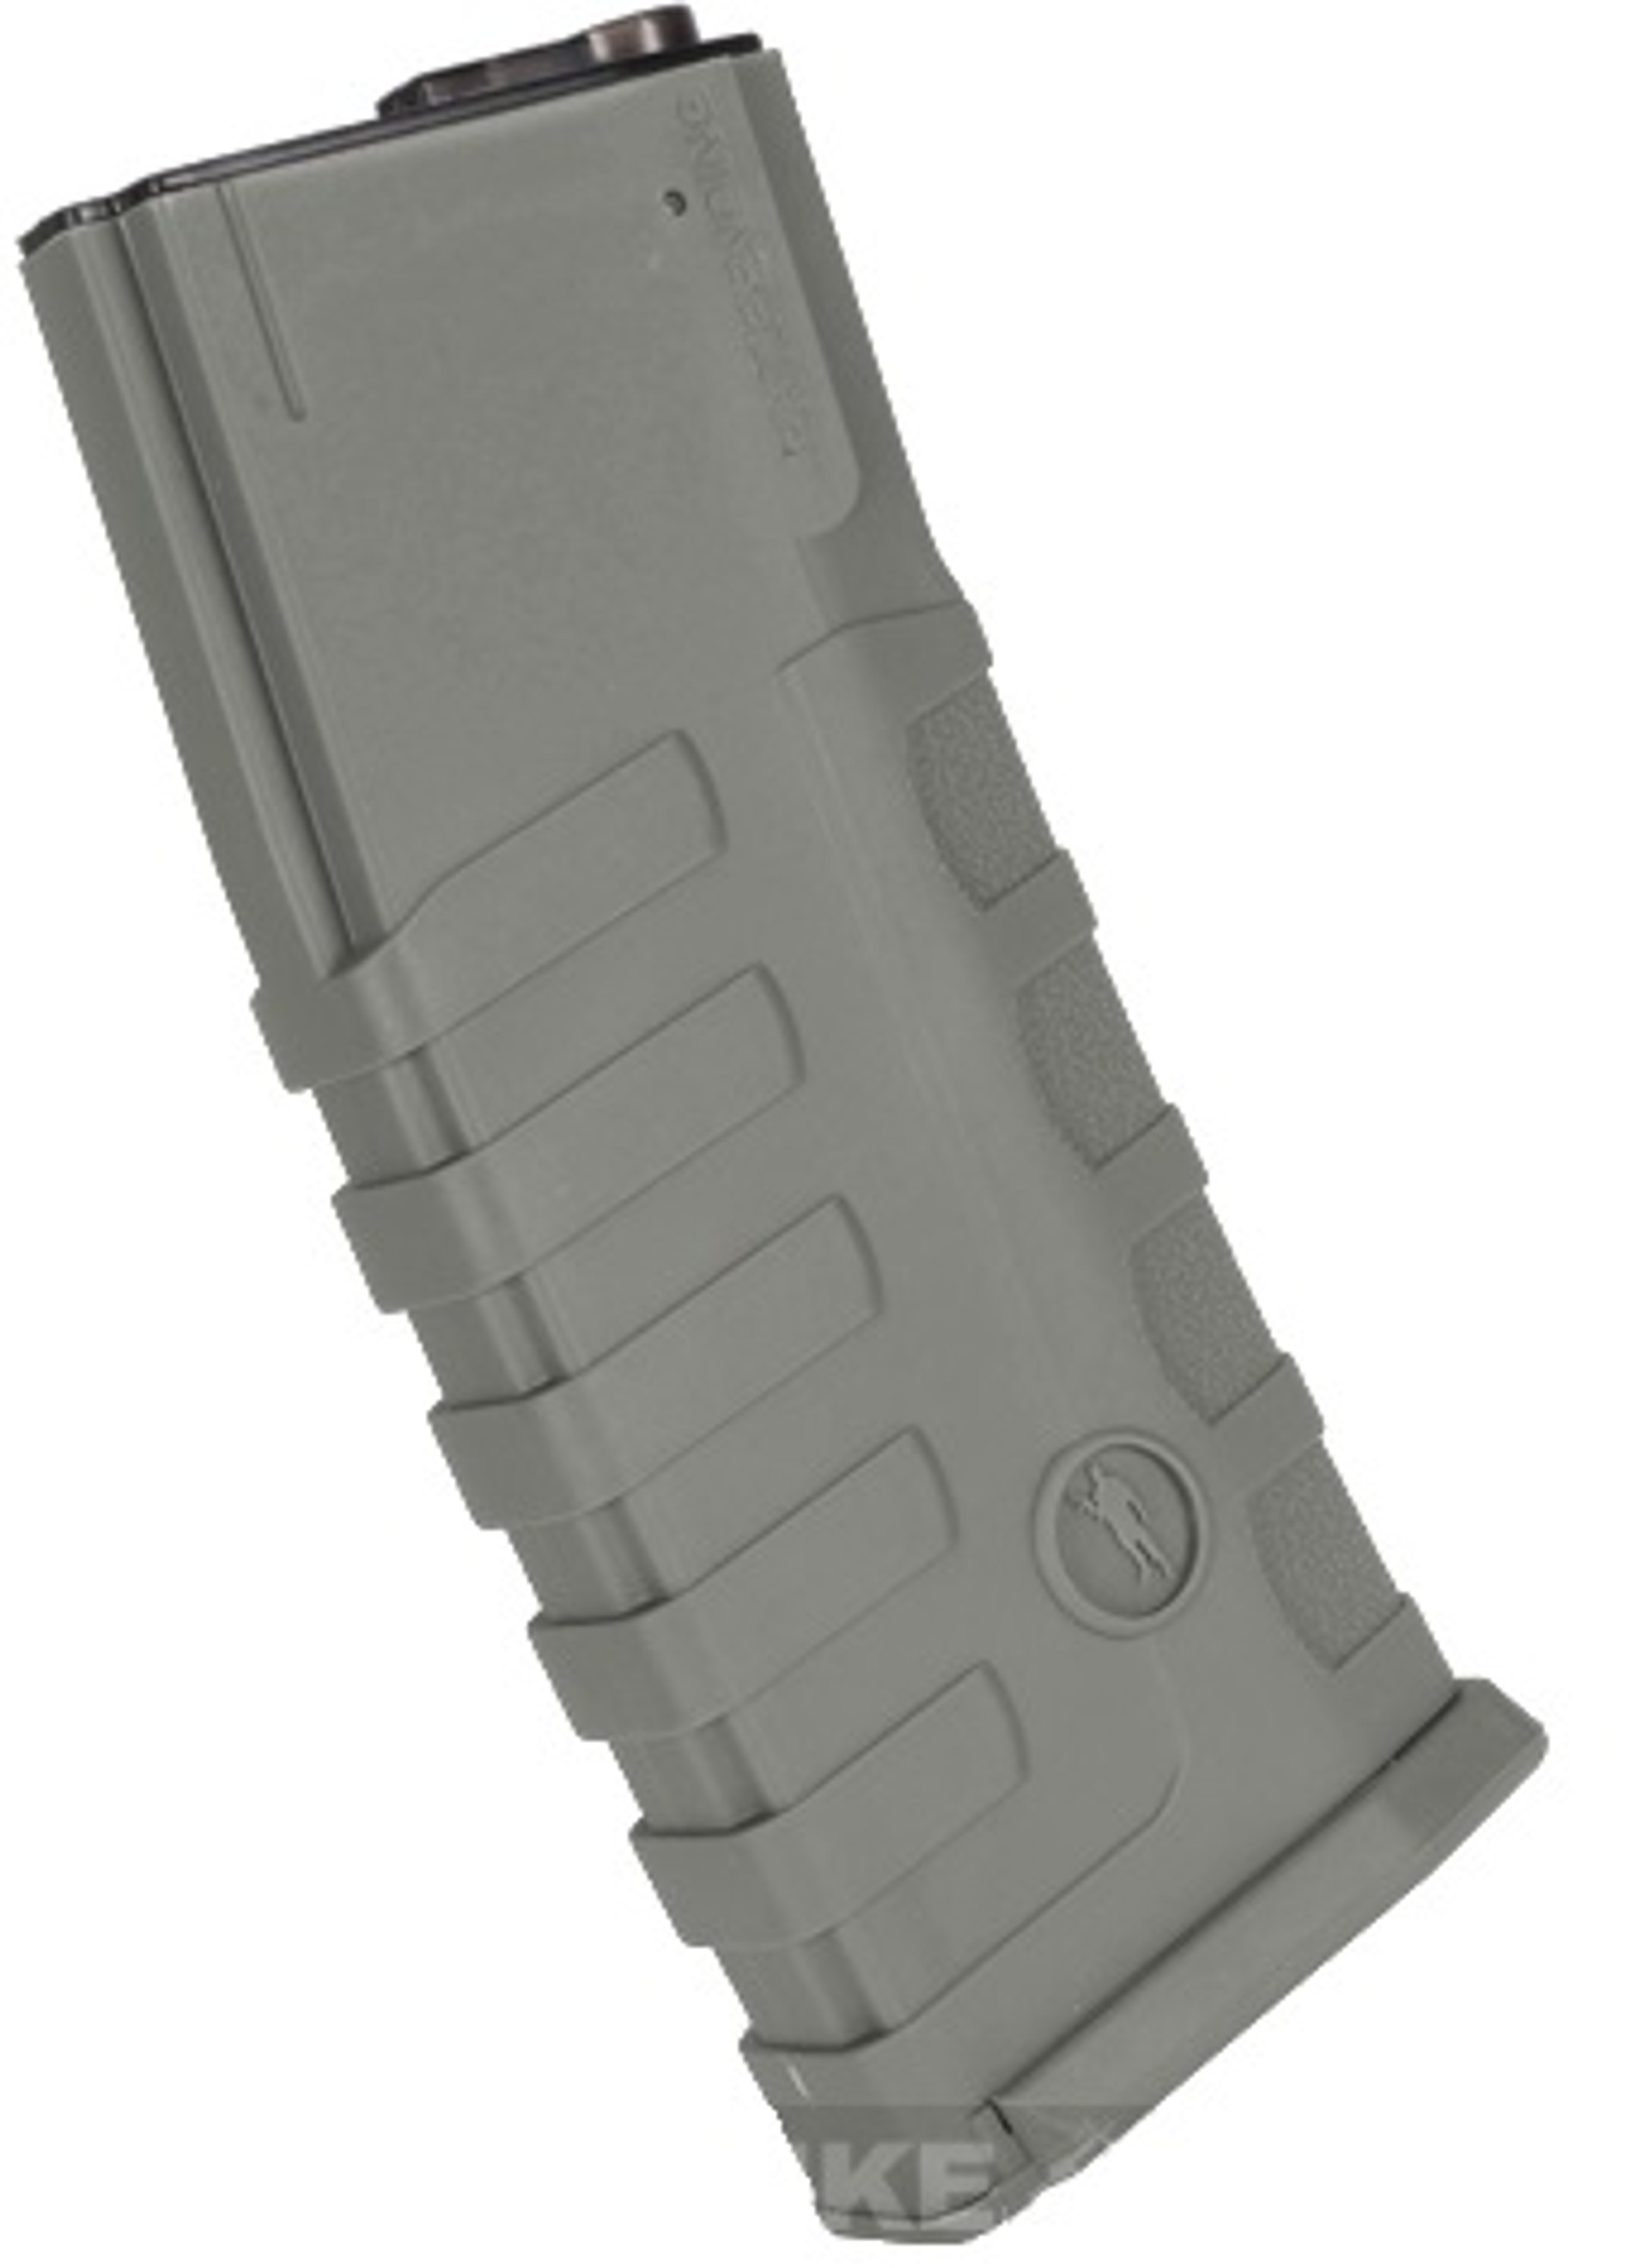 Command Arms CAA Licensed 360rd Mag For M4 M16 Airsoft AEG By King Arms - Foliage Green